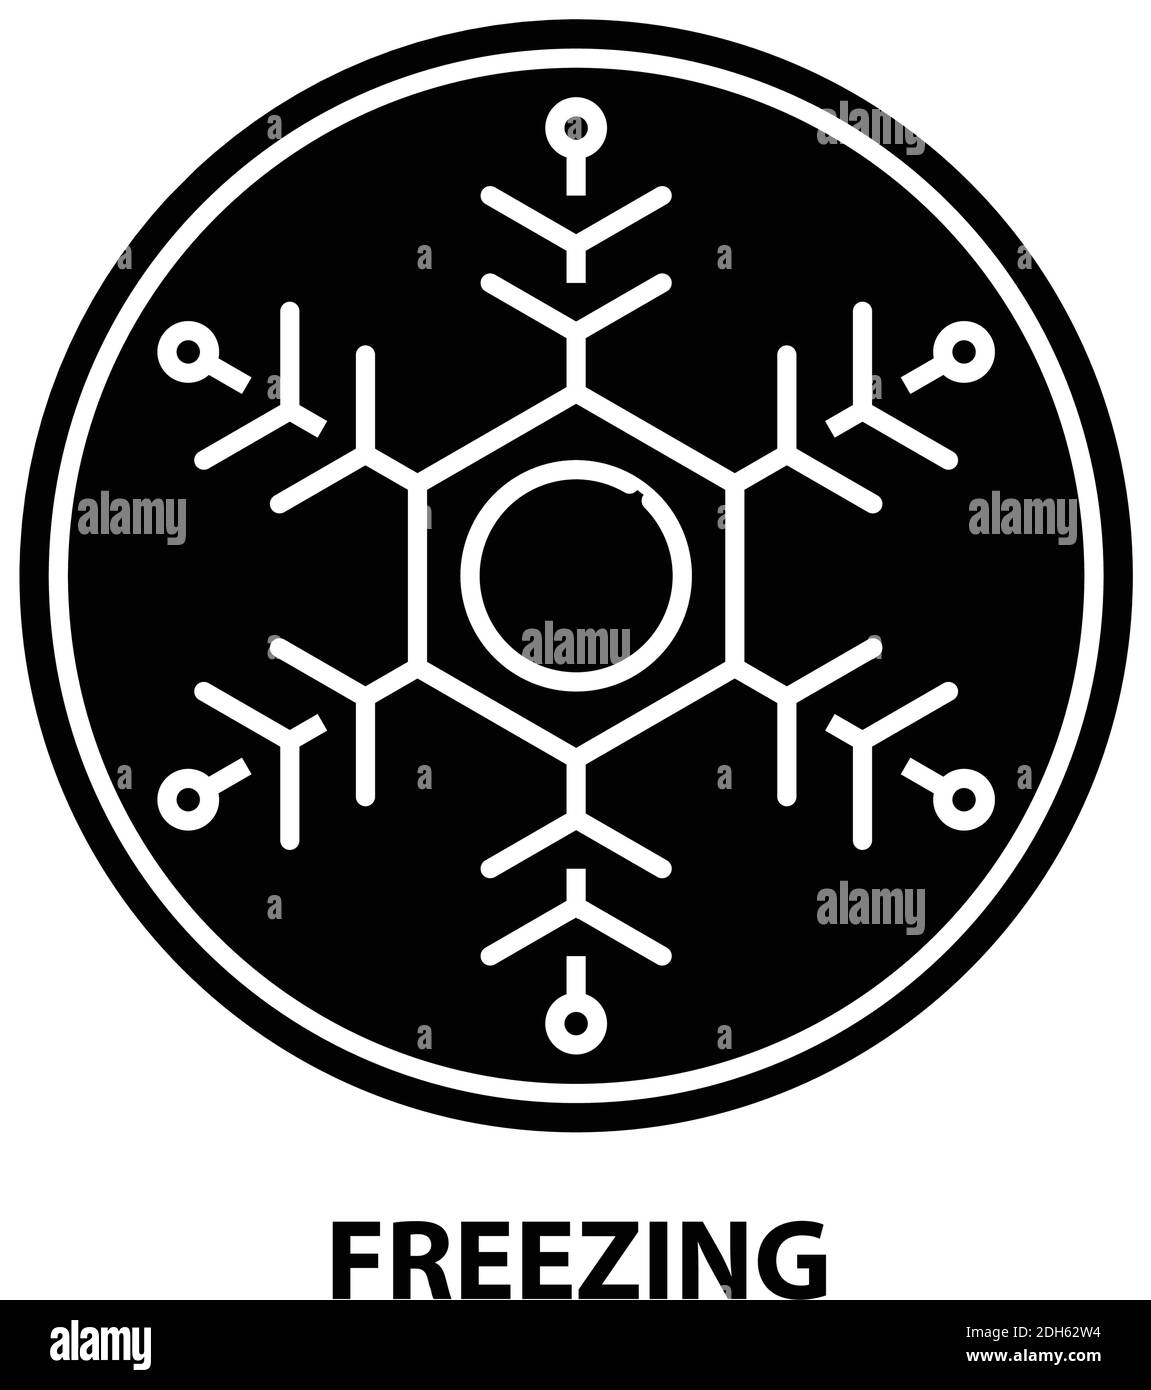 freezing icon, black vector sign with editable strokes, concept illustration Stock Vector